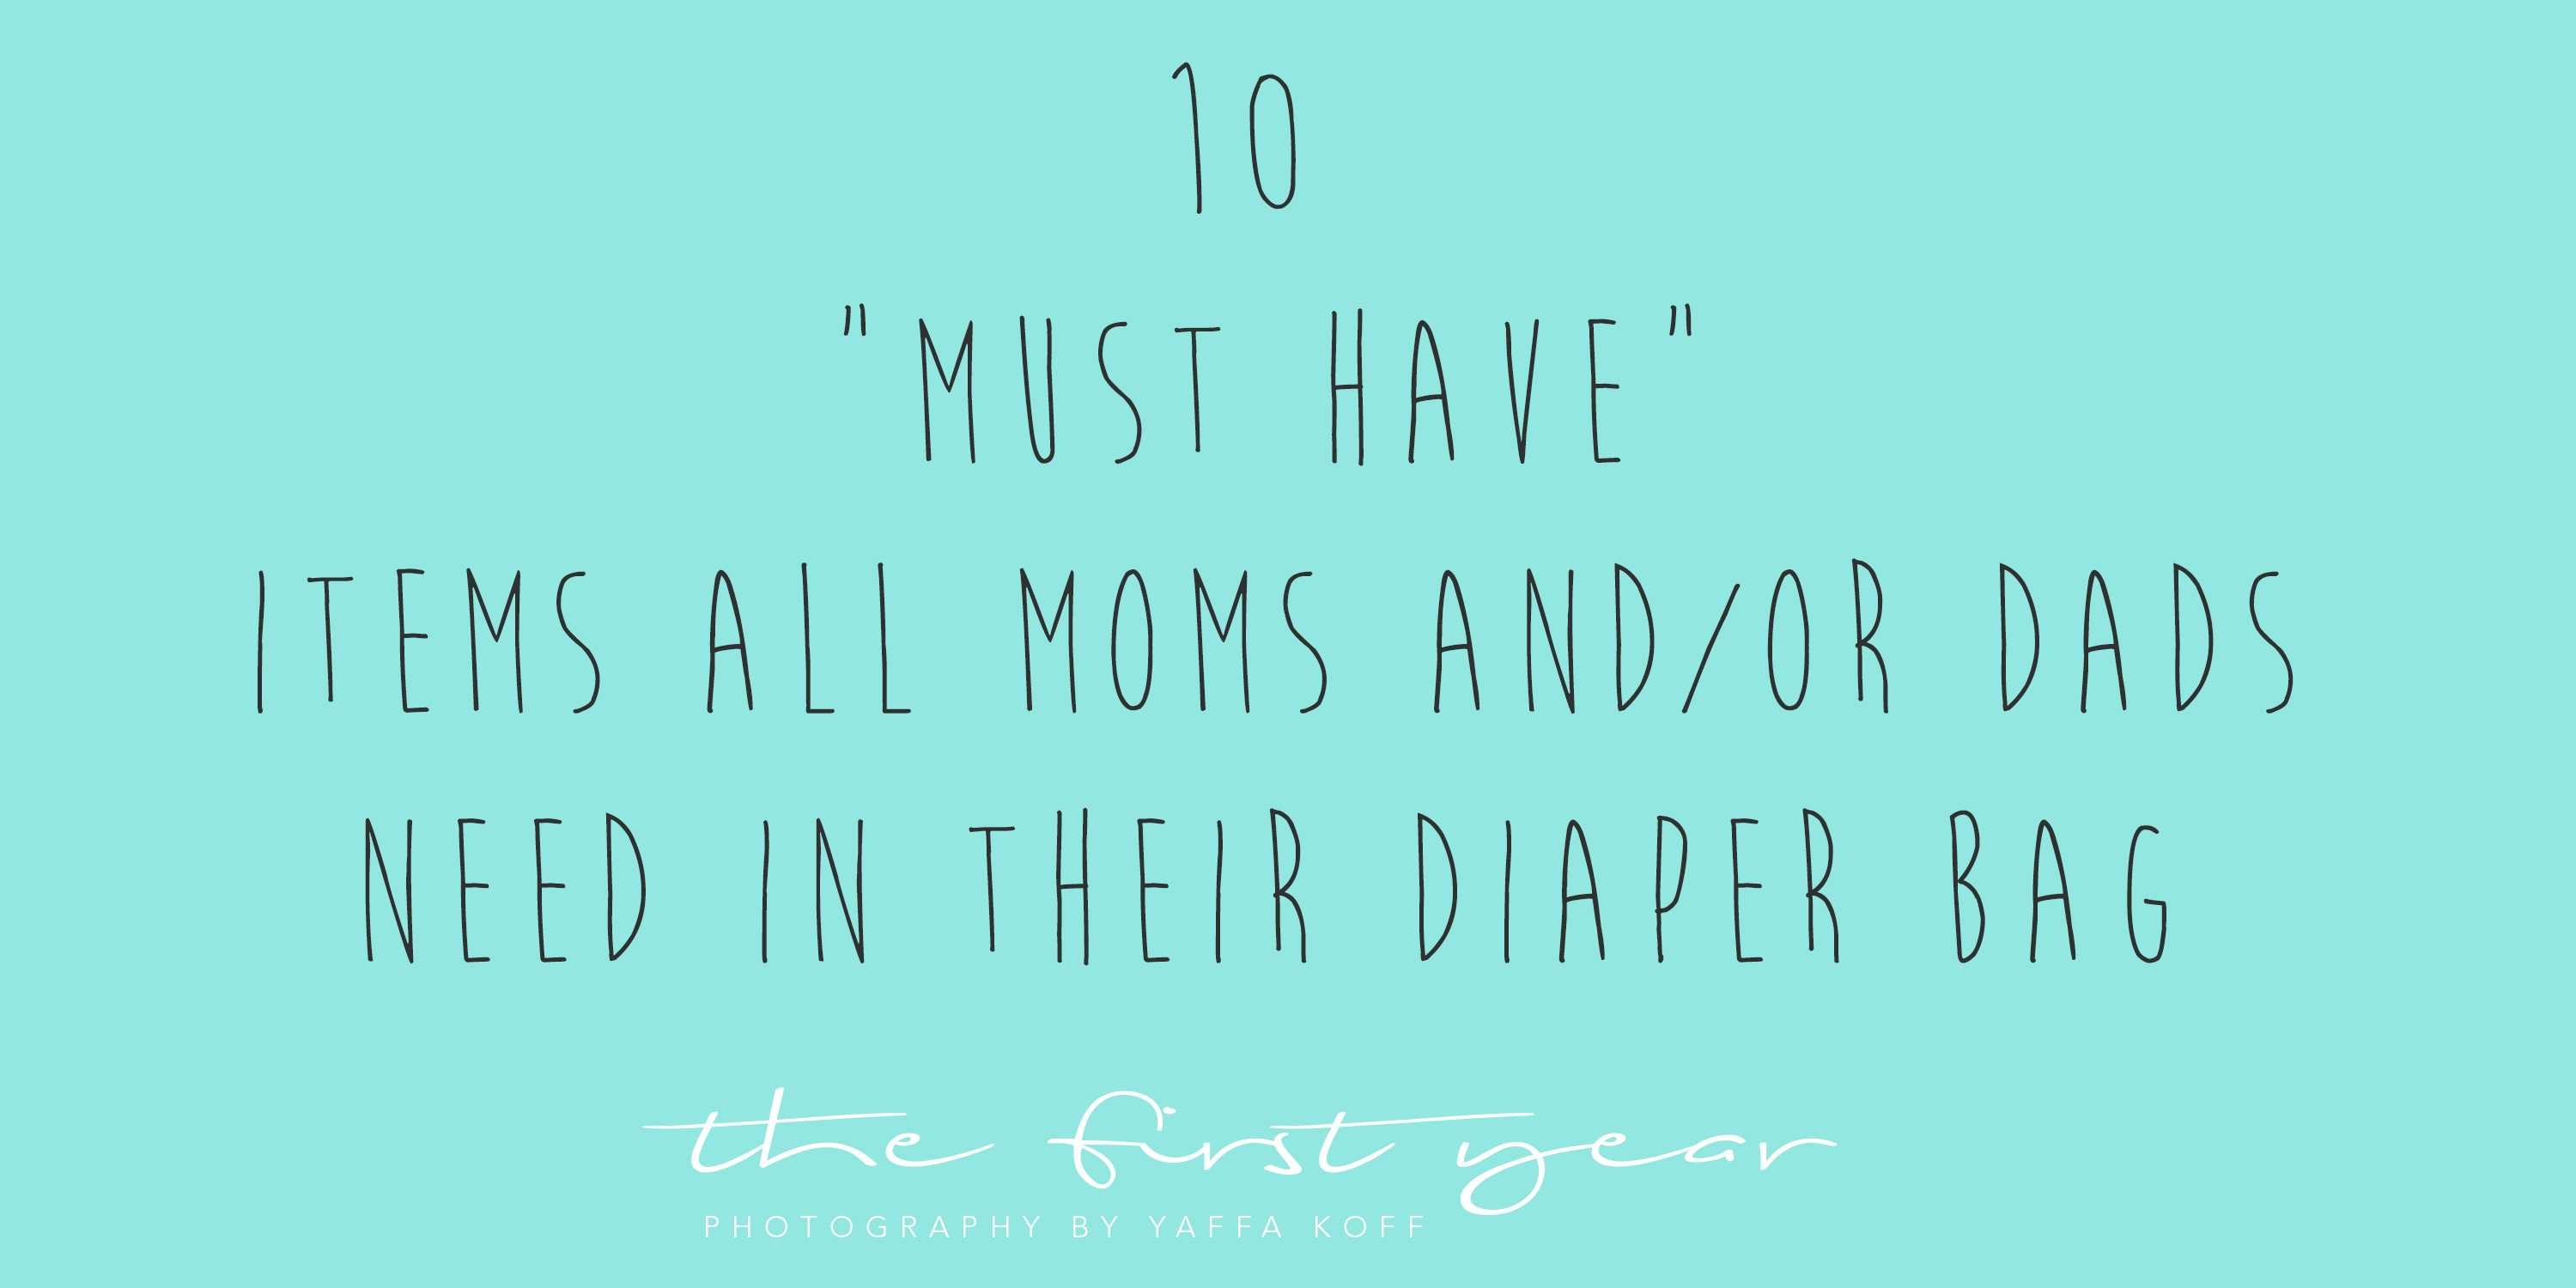 10 Must Have Items All Moms and/or Dads Need in Their Diaper Bag